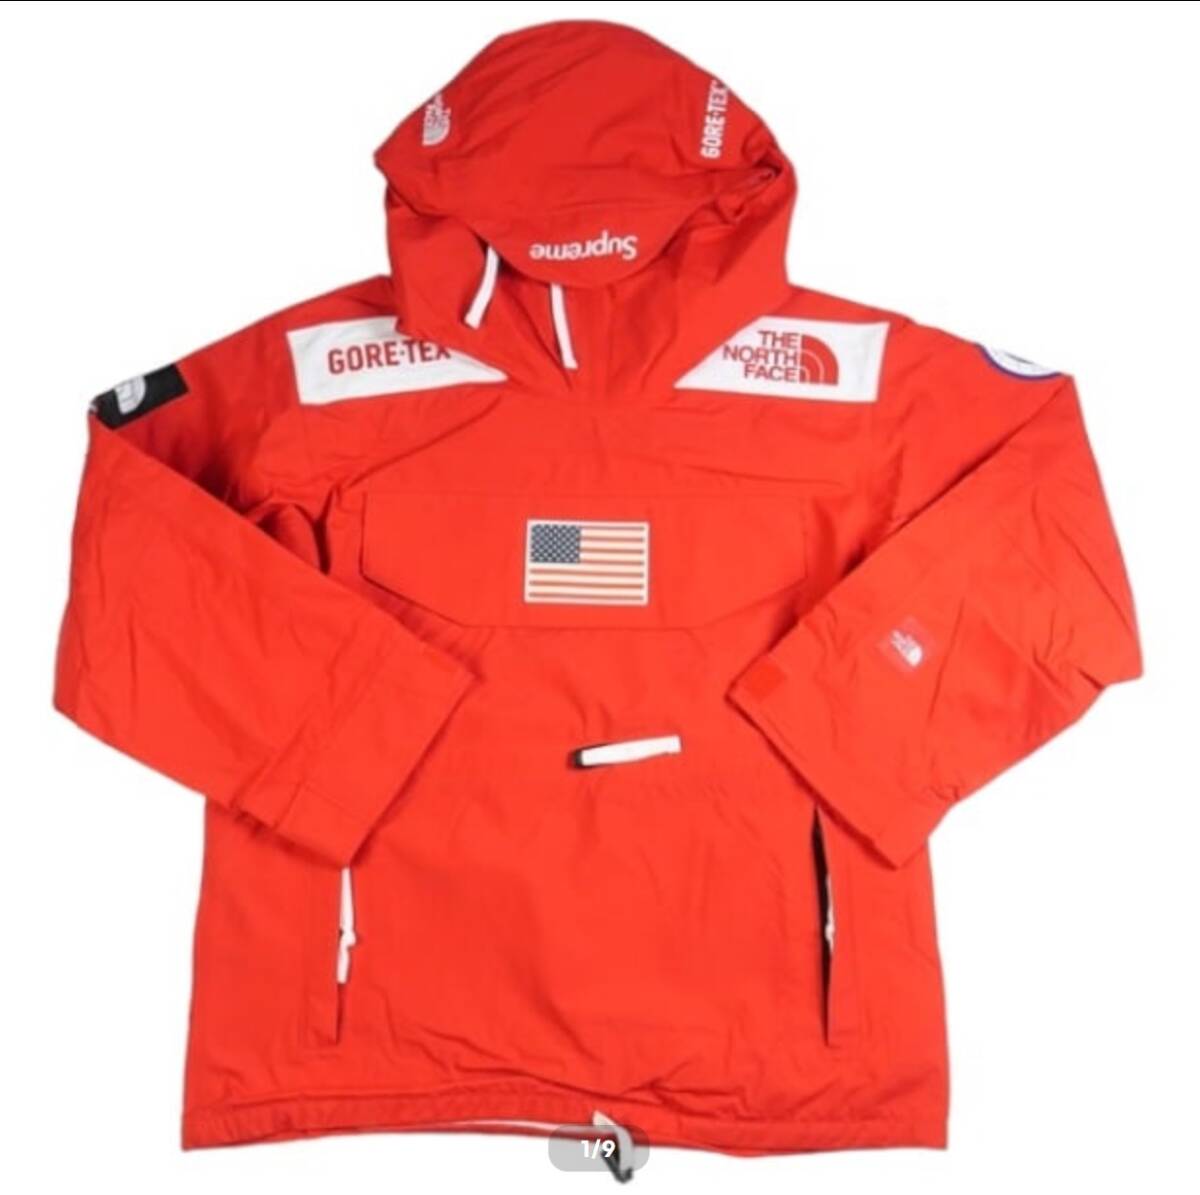 SUPREME シュプリーム ×THE NORTH FACE 17SS Trans Antarctica Expedition Pullover GORE-TEX Red ジャケット 赤 サイズS